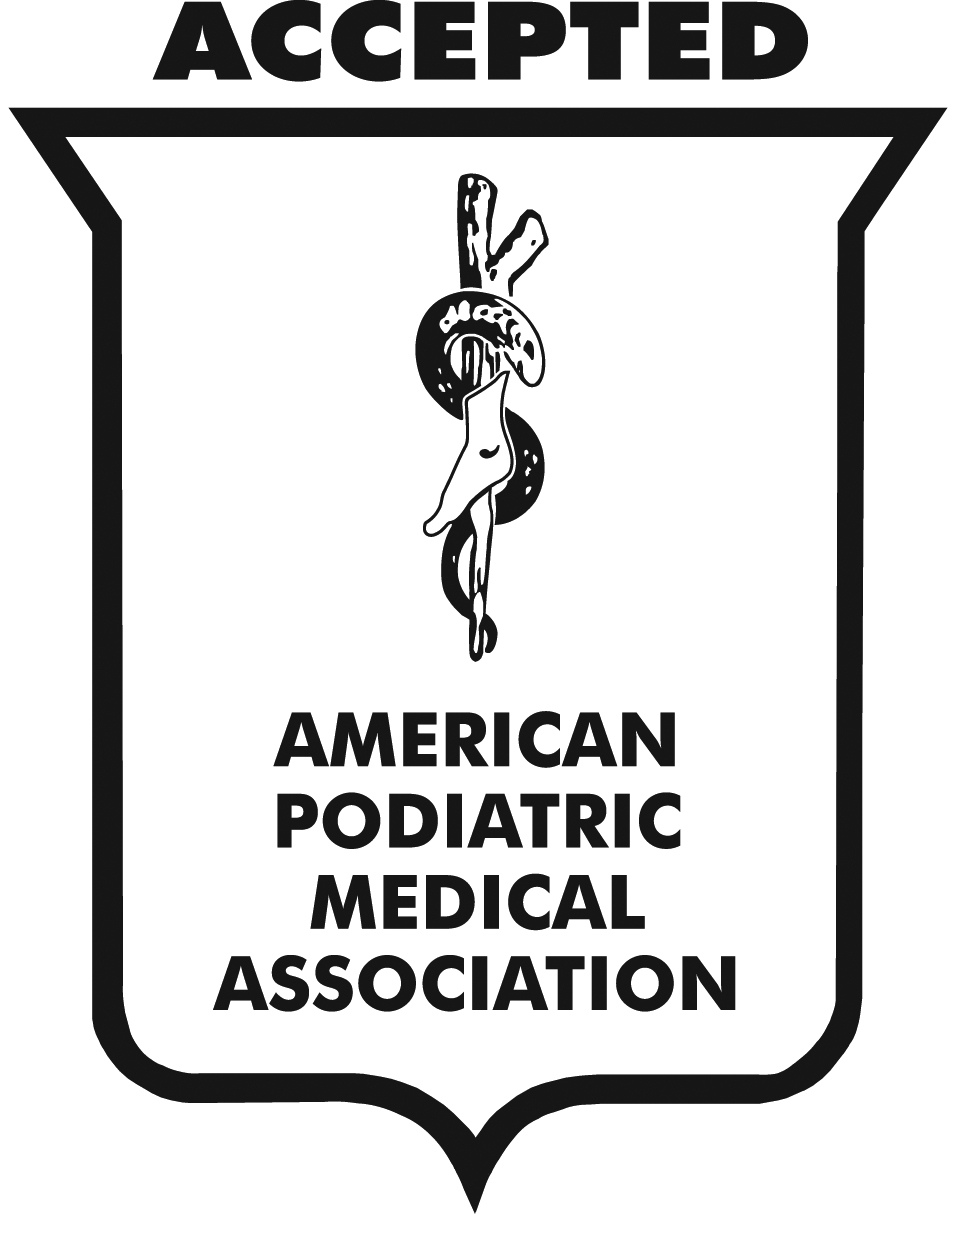 The American Podiatric Medical Association Seal of Acceptence